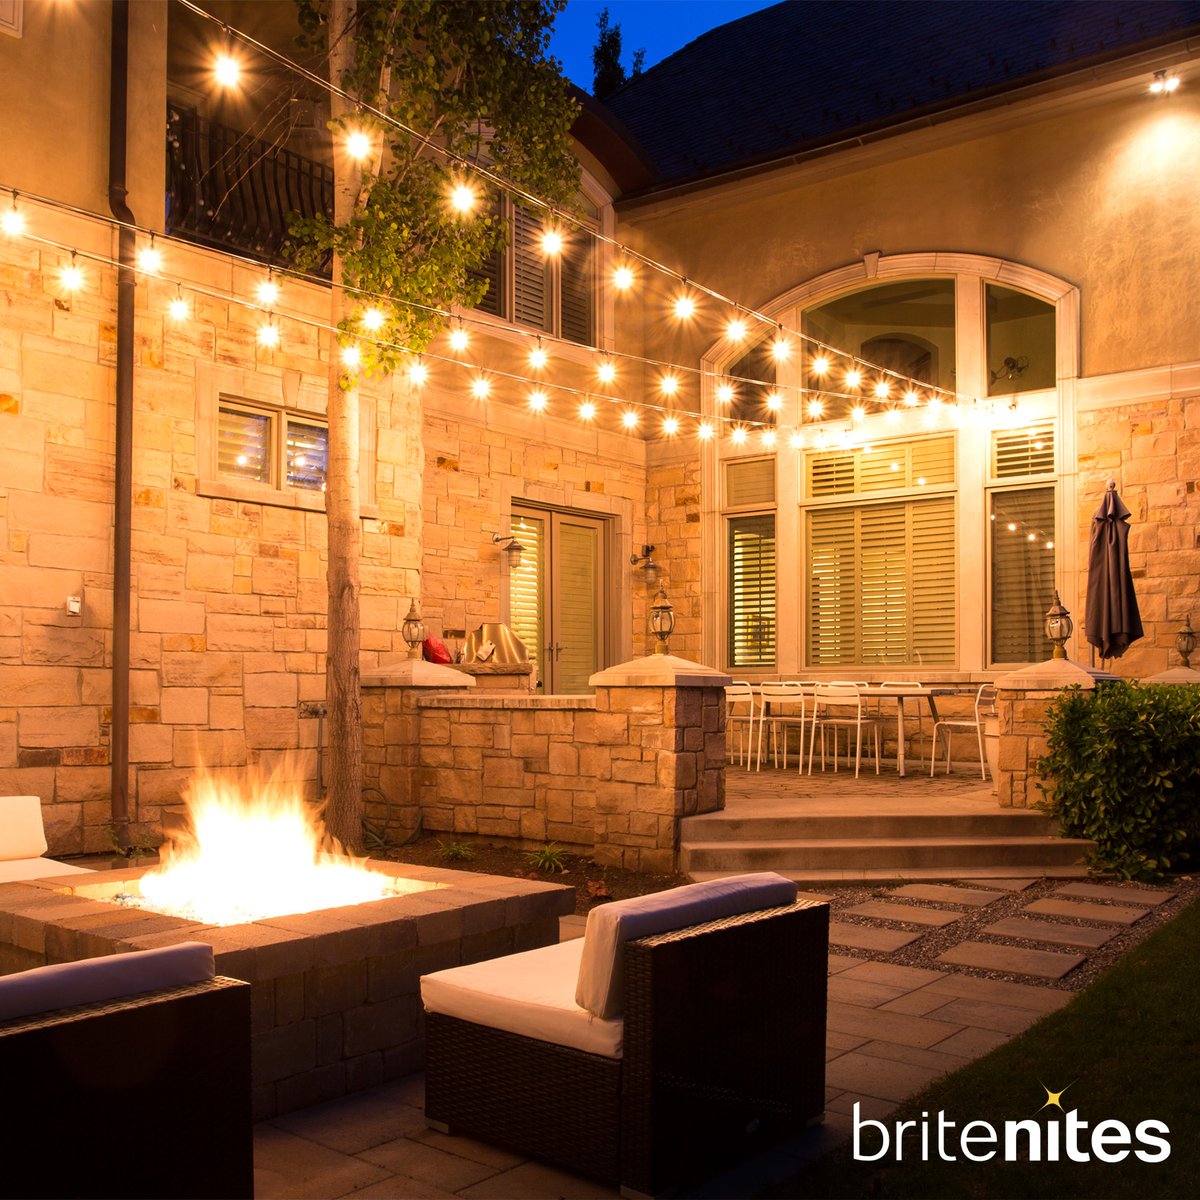 Bistro lights can really bring your home patio to life. If you need bistro lights for a restaurant or other commercial outdoor space Brite Nites has got you covered. Ask us about our bistro lights in a free design consultation. Call (801) 432-2111.

#bistrolights #outdoorlights